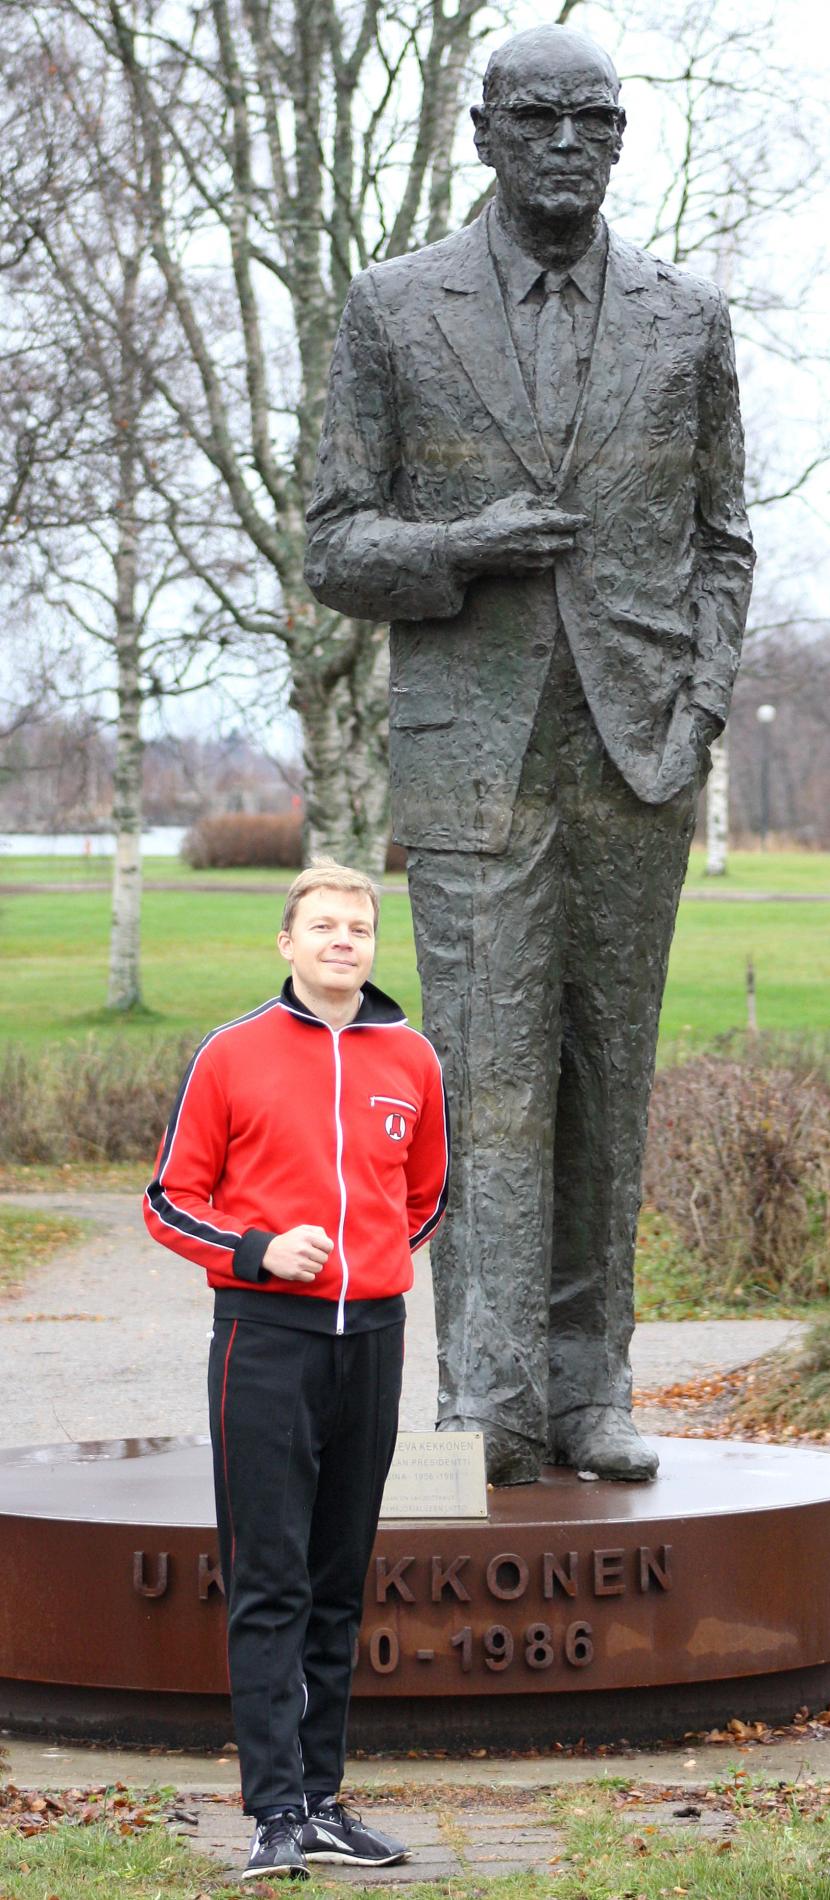 Hannu poses in Rautaruukki’s red tracksuit by the statue of Kekkonen.